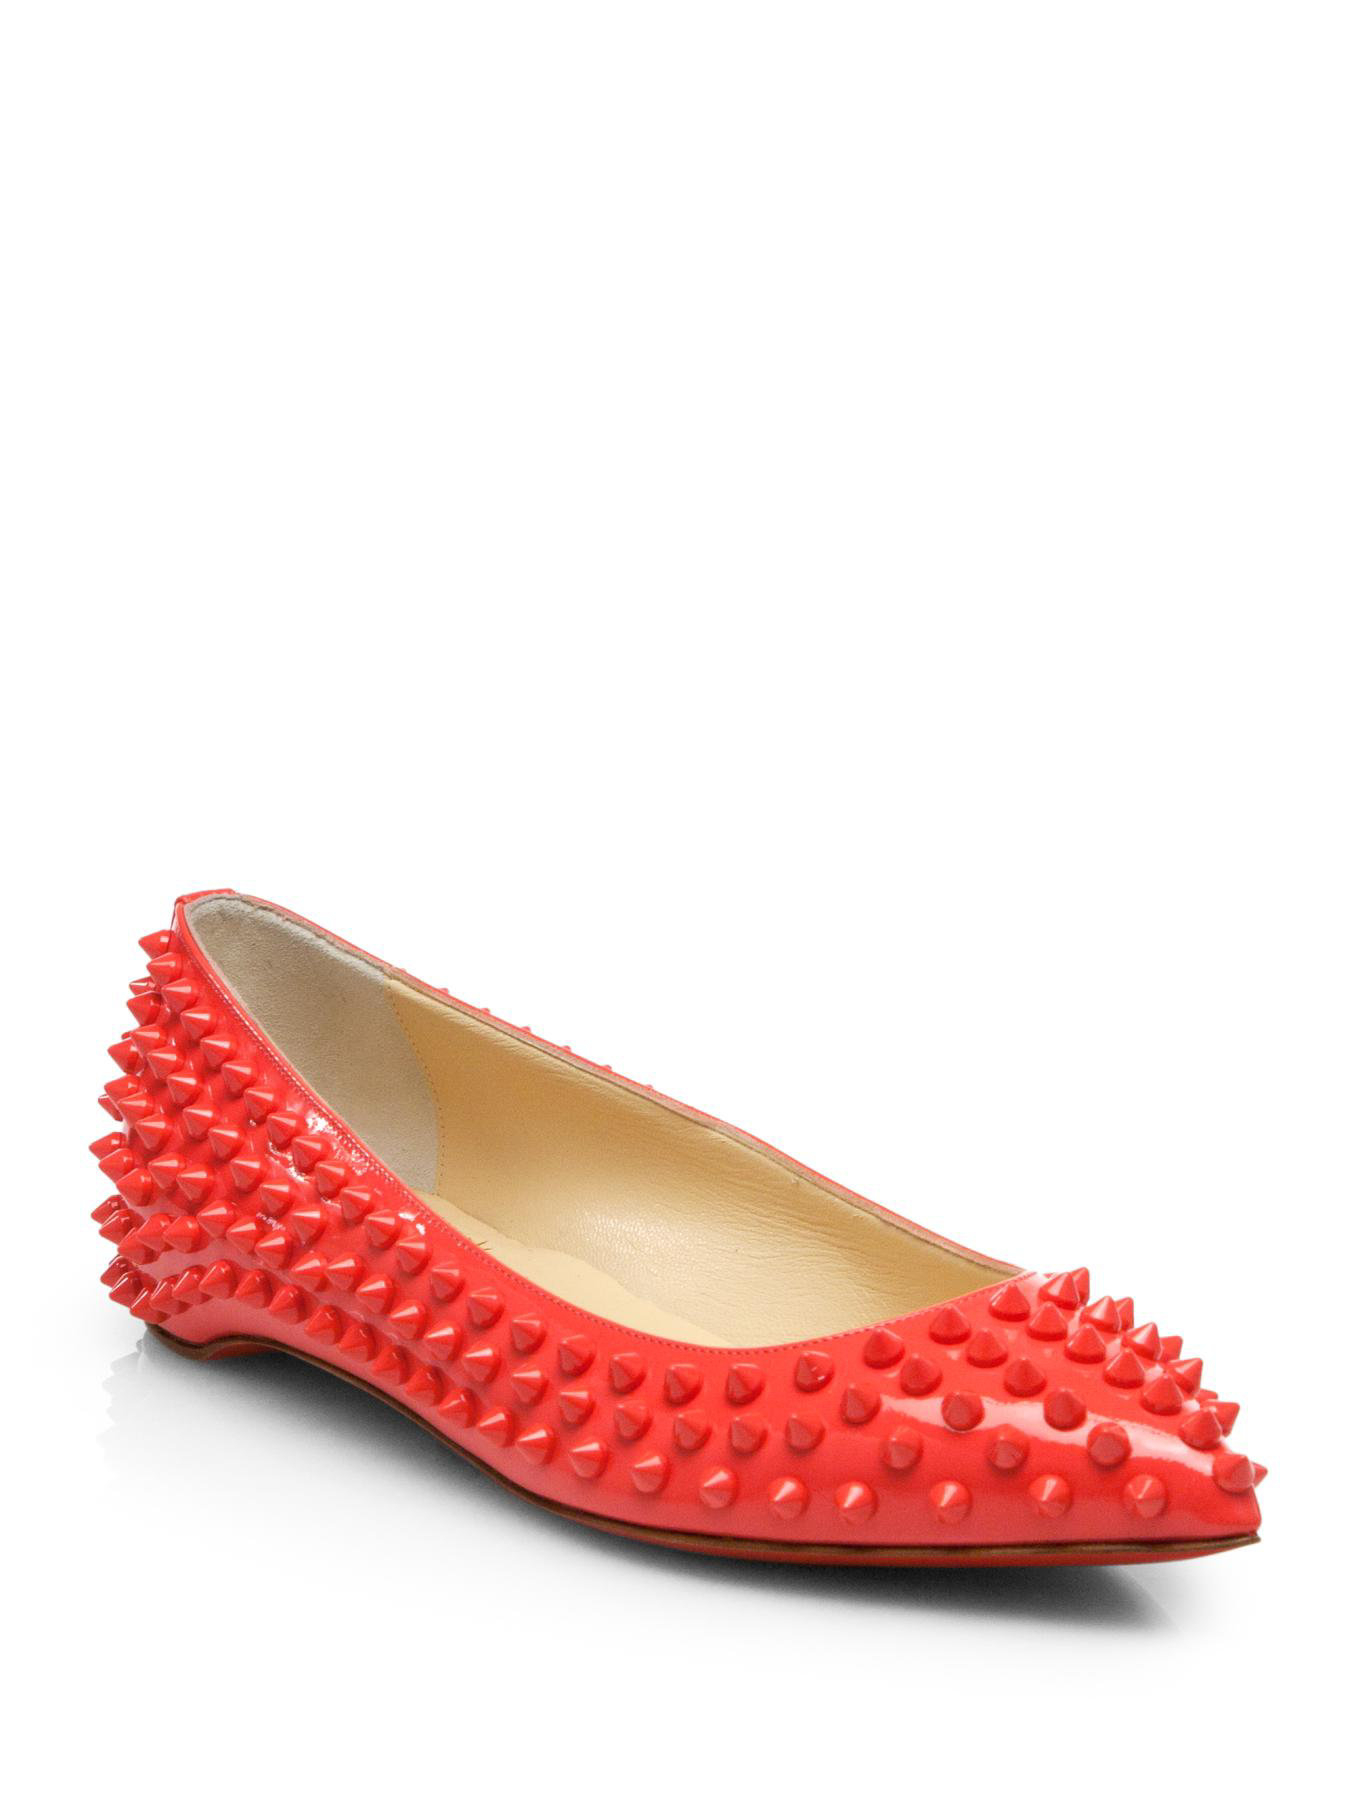 louboutin spiked flats